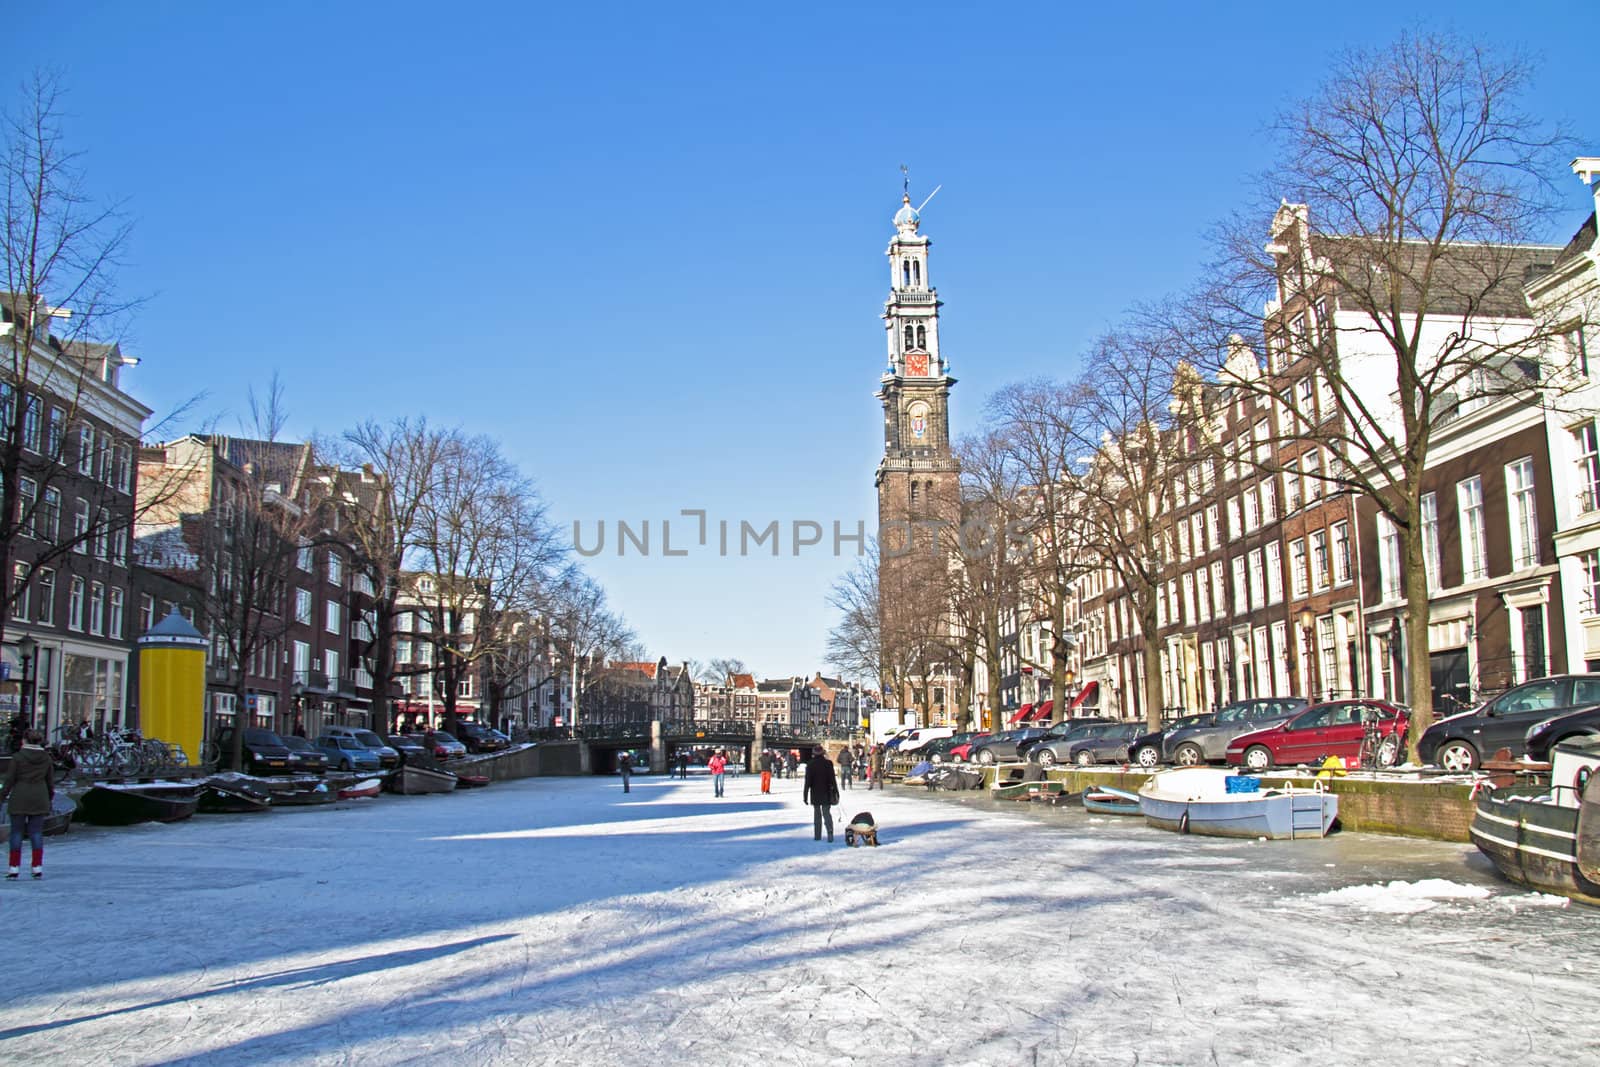 Winter in Amsterdam the Netherlands by devy